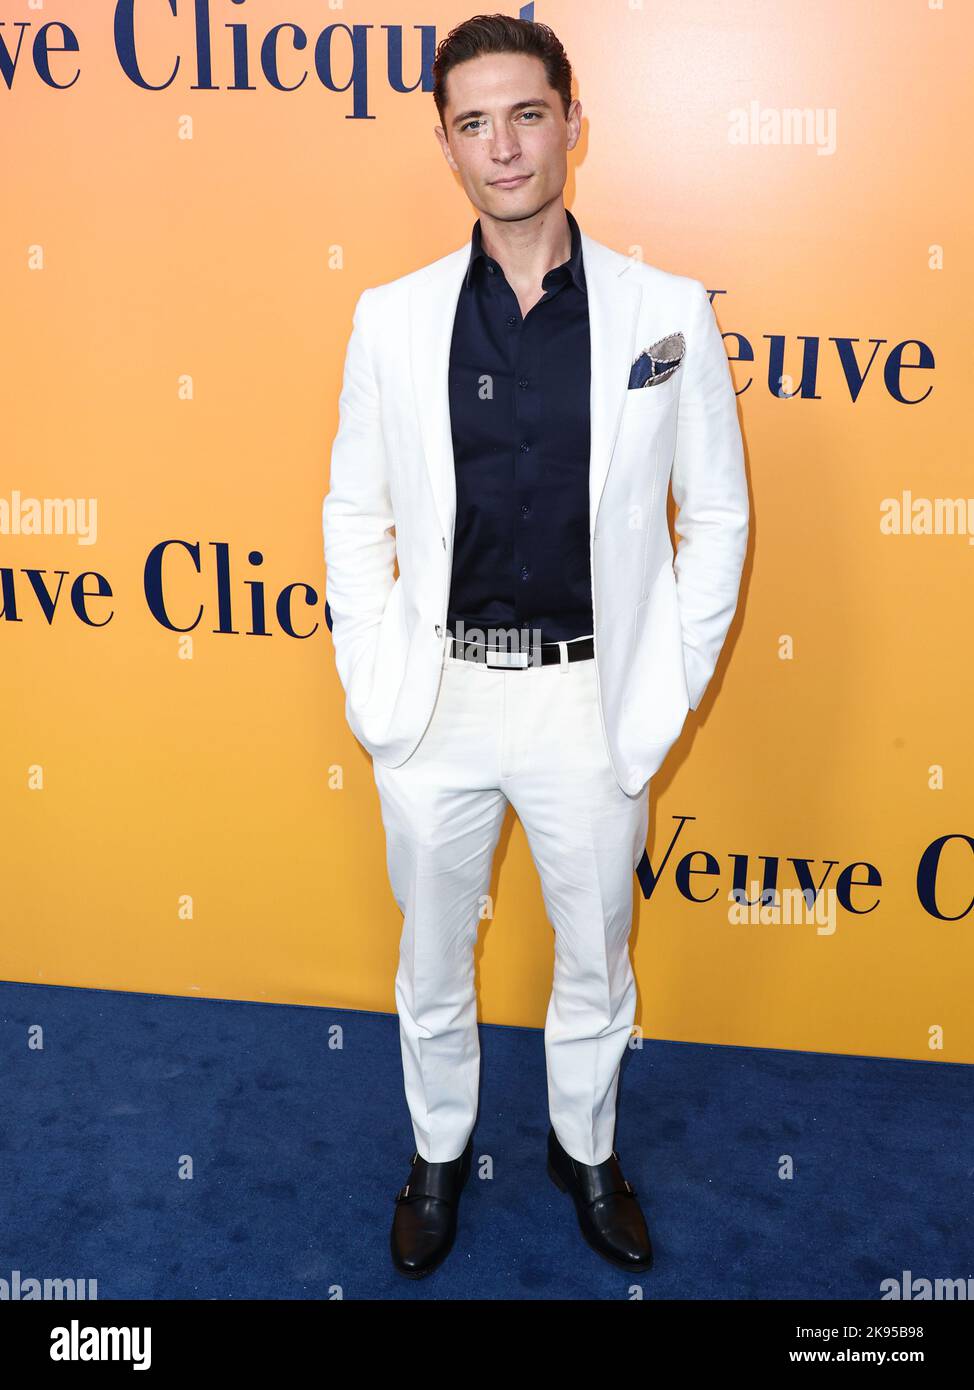 BEVERLY HILLS, LOS ANGELES, CALIFORNIA, USA - OCTOBER 25: American actor Elijah Allan-Blitz arrives at the Veuve Clicquot 250th Anniversary Solaire Culture Exhibition Opening held at 468 North Rodeo Drive on October 25, 2022 in Beverly Hills, Los Angeles, California, United States. (Photo by Xavier Collin/Image Press Agency) Stock Photo